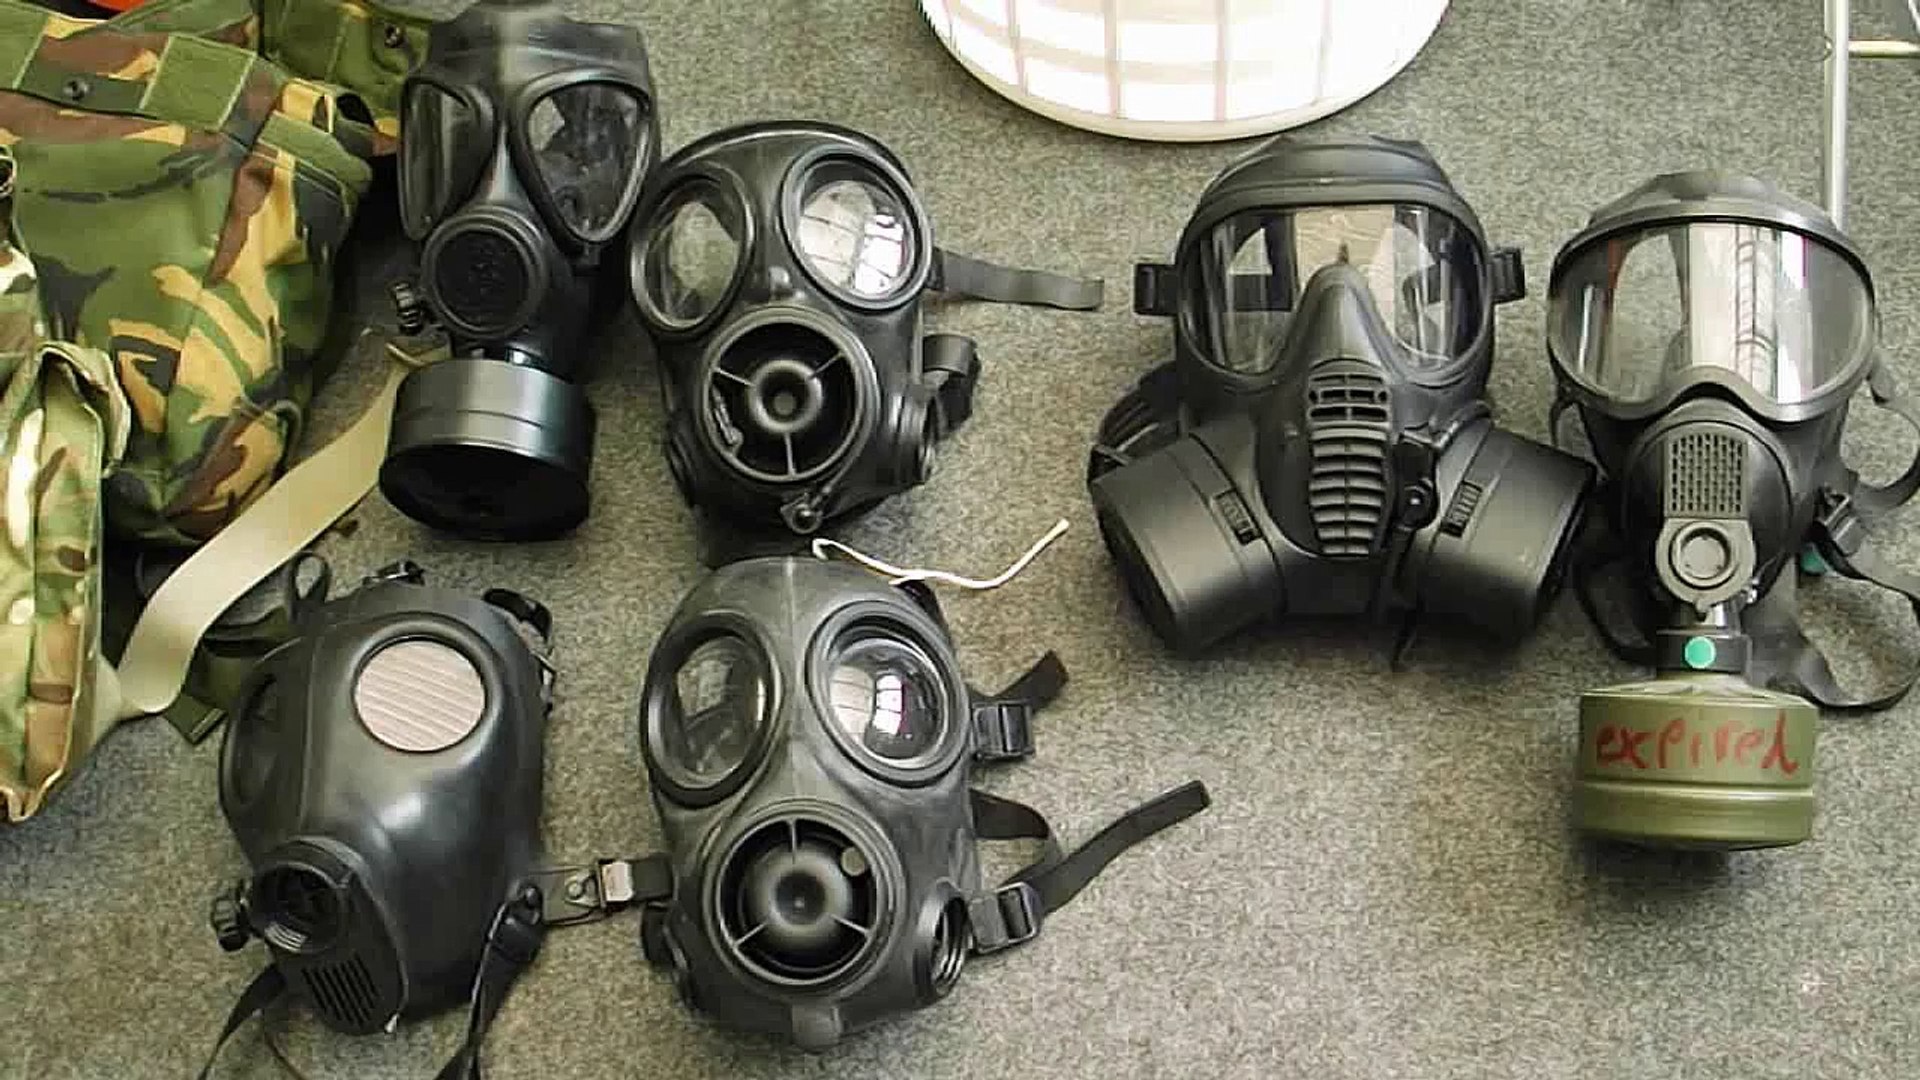 gas mask for a civilian - Dailymotion Video